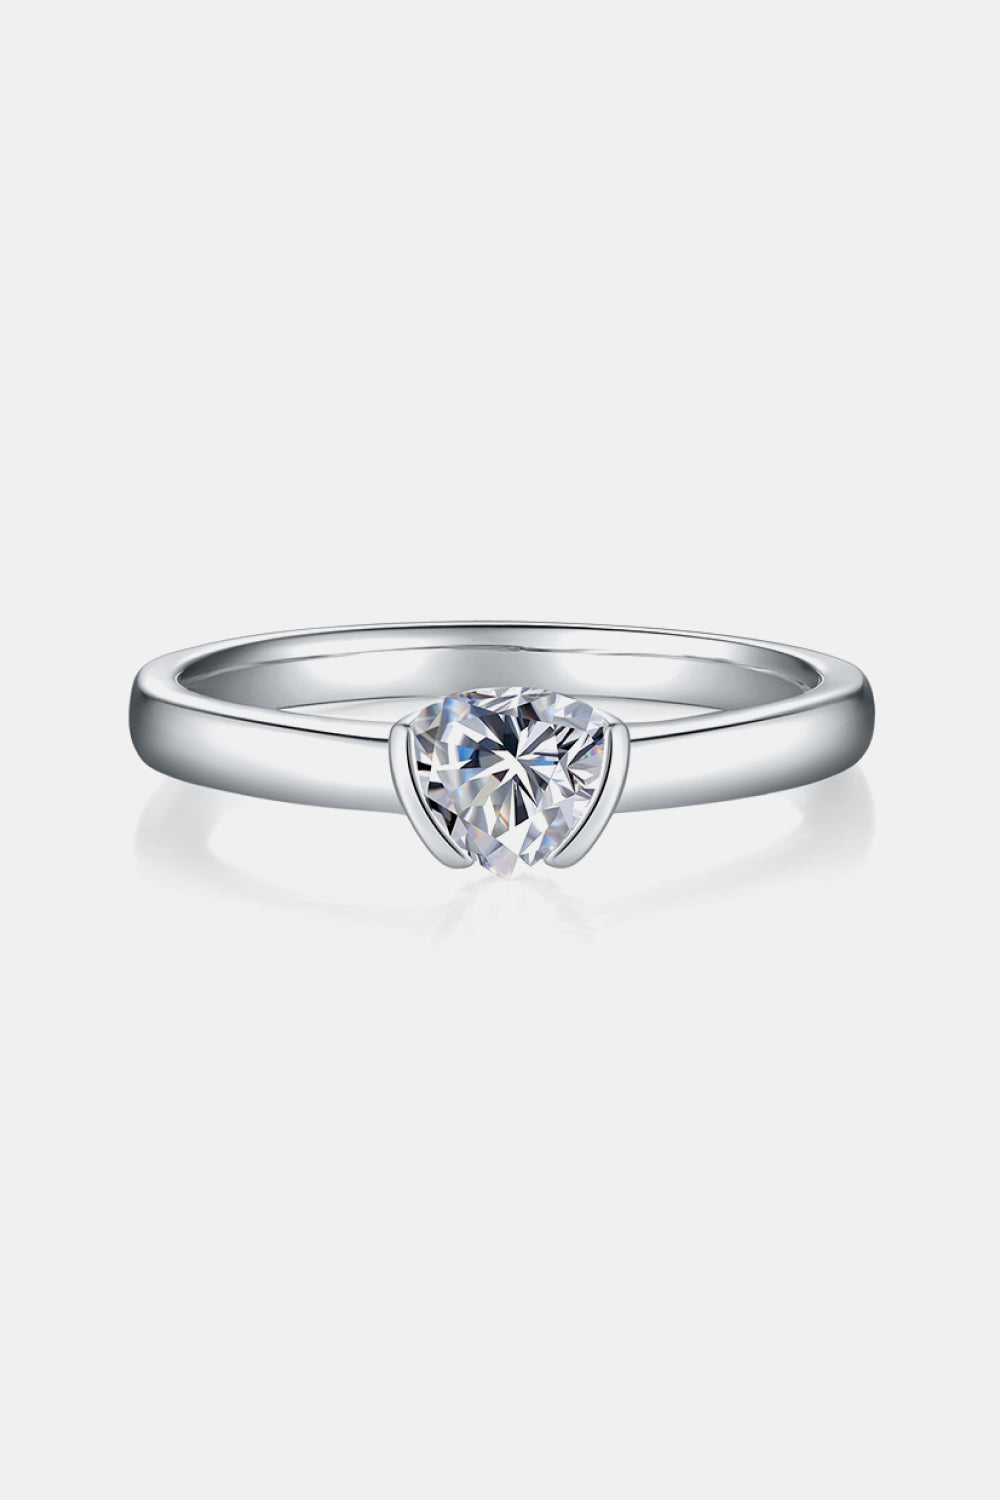 Women’s Moissanite 925 Sterling Silver Solitaire Ring